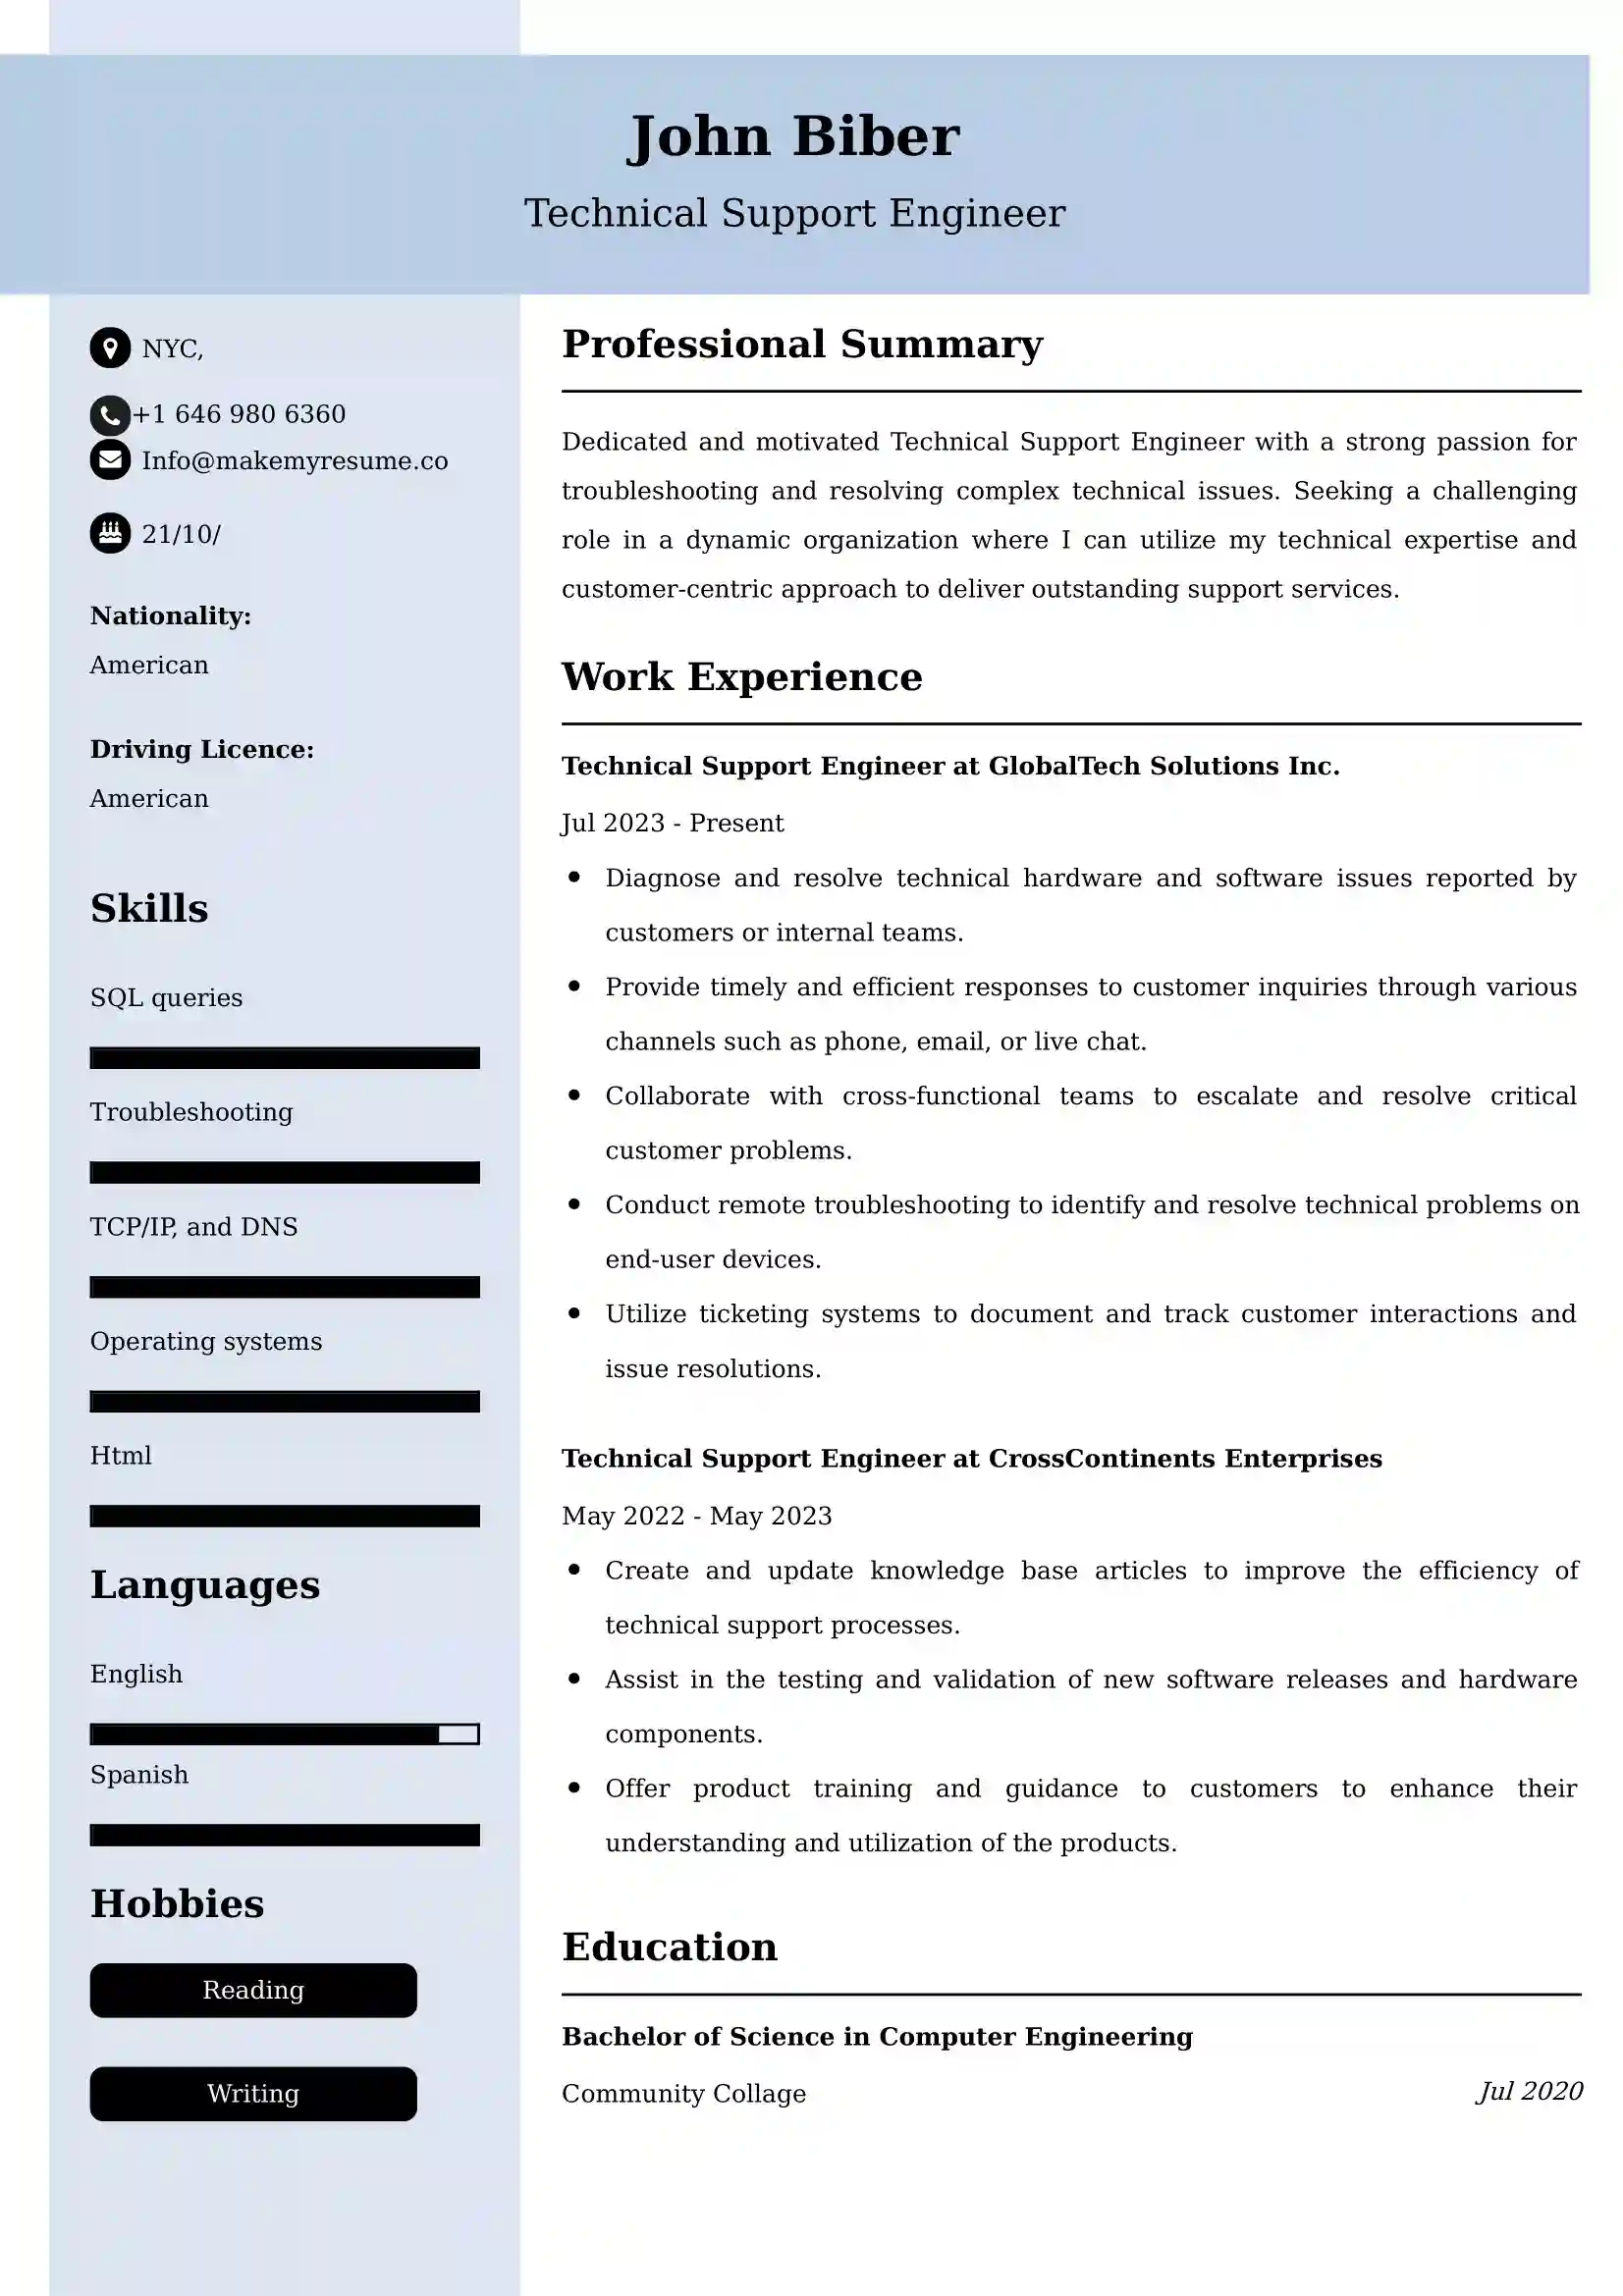 Technical Support Engineer Resume Examples - Australian Format and Tips